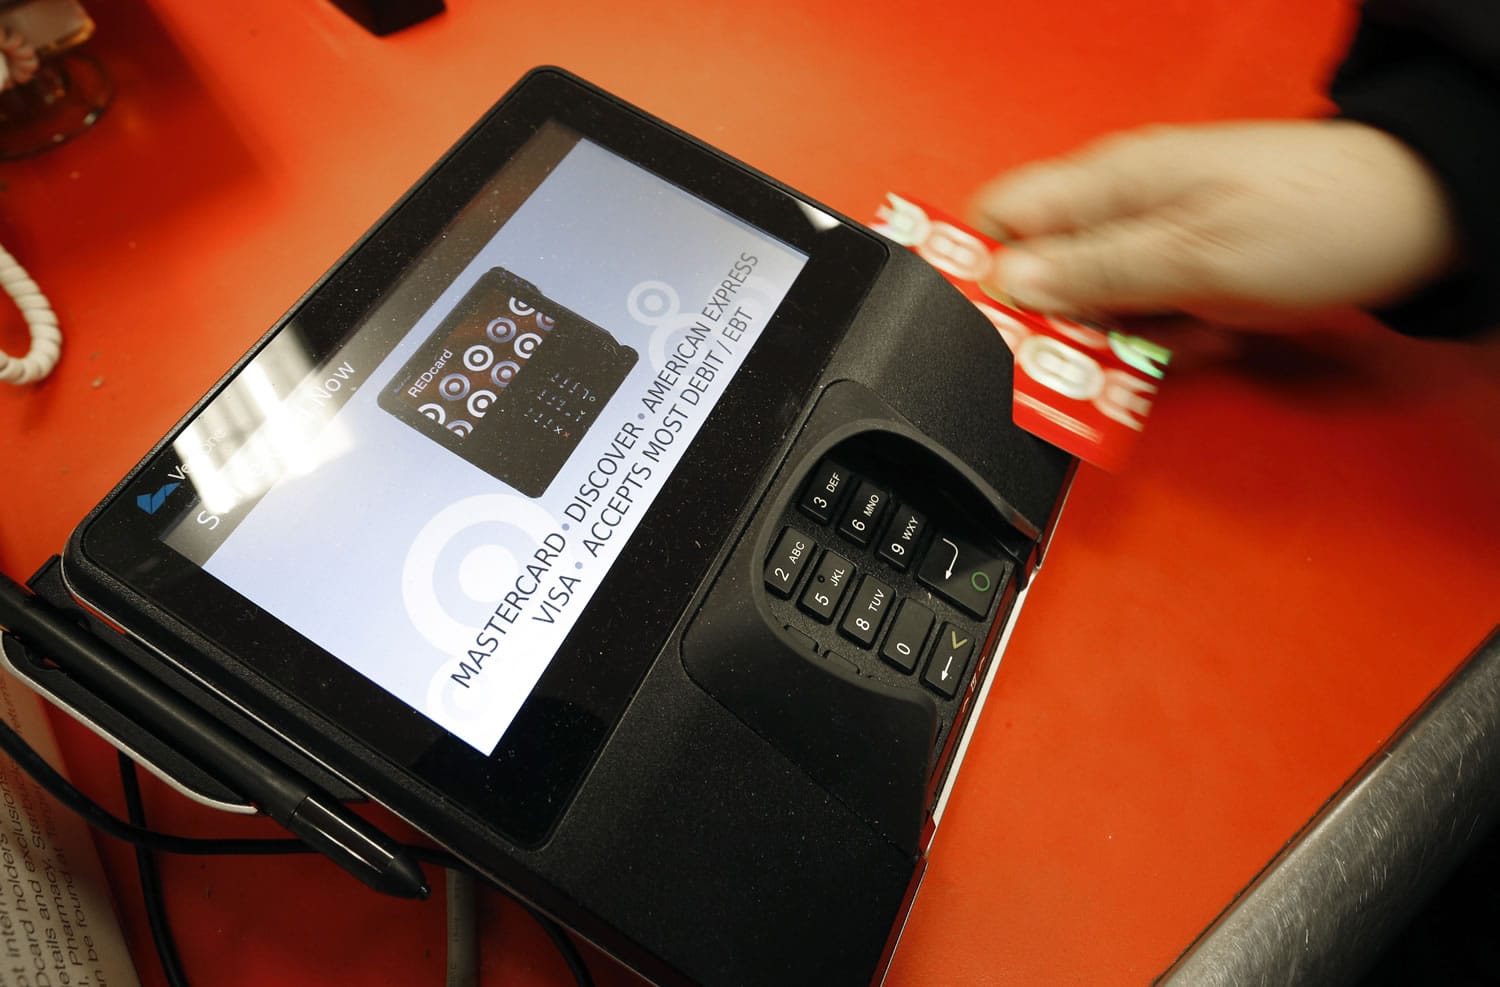 Associated Press files
A shopper pays for purchases at a Target store in South Portland, Maine. Criminals stole personal information from tens of millions of Americans in data breaches in 2014.